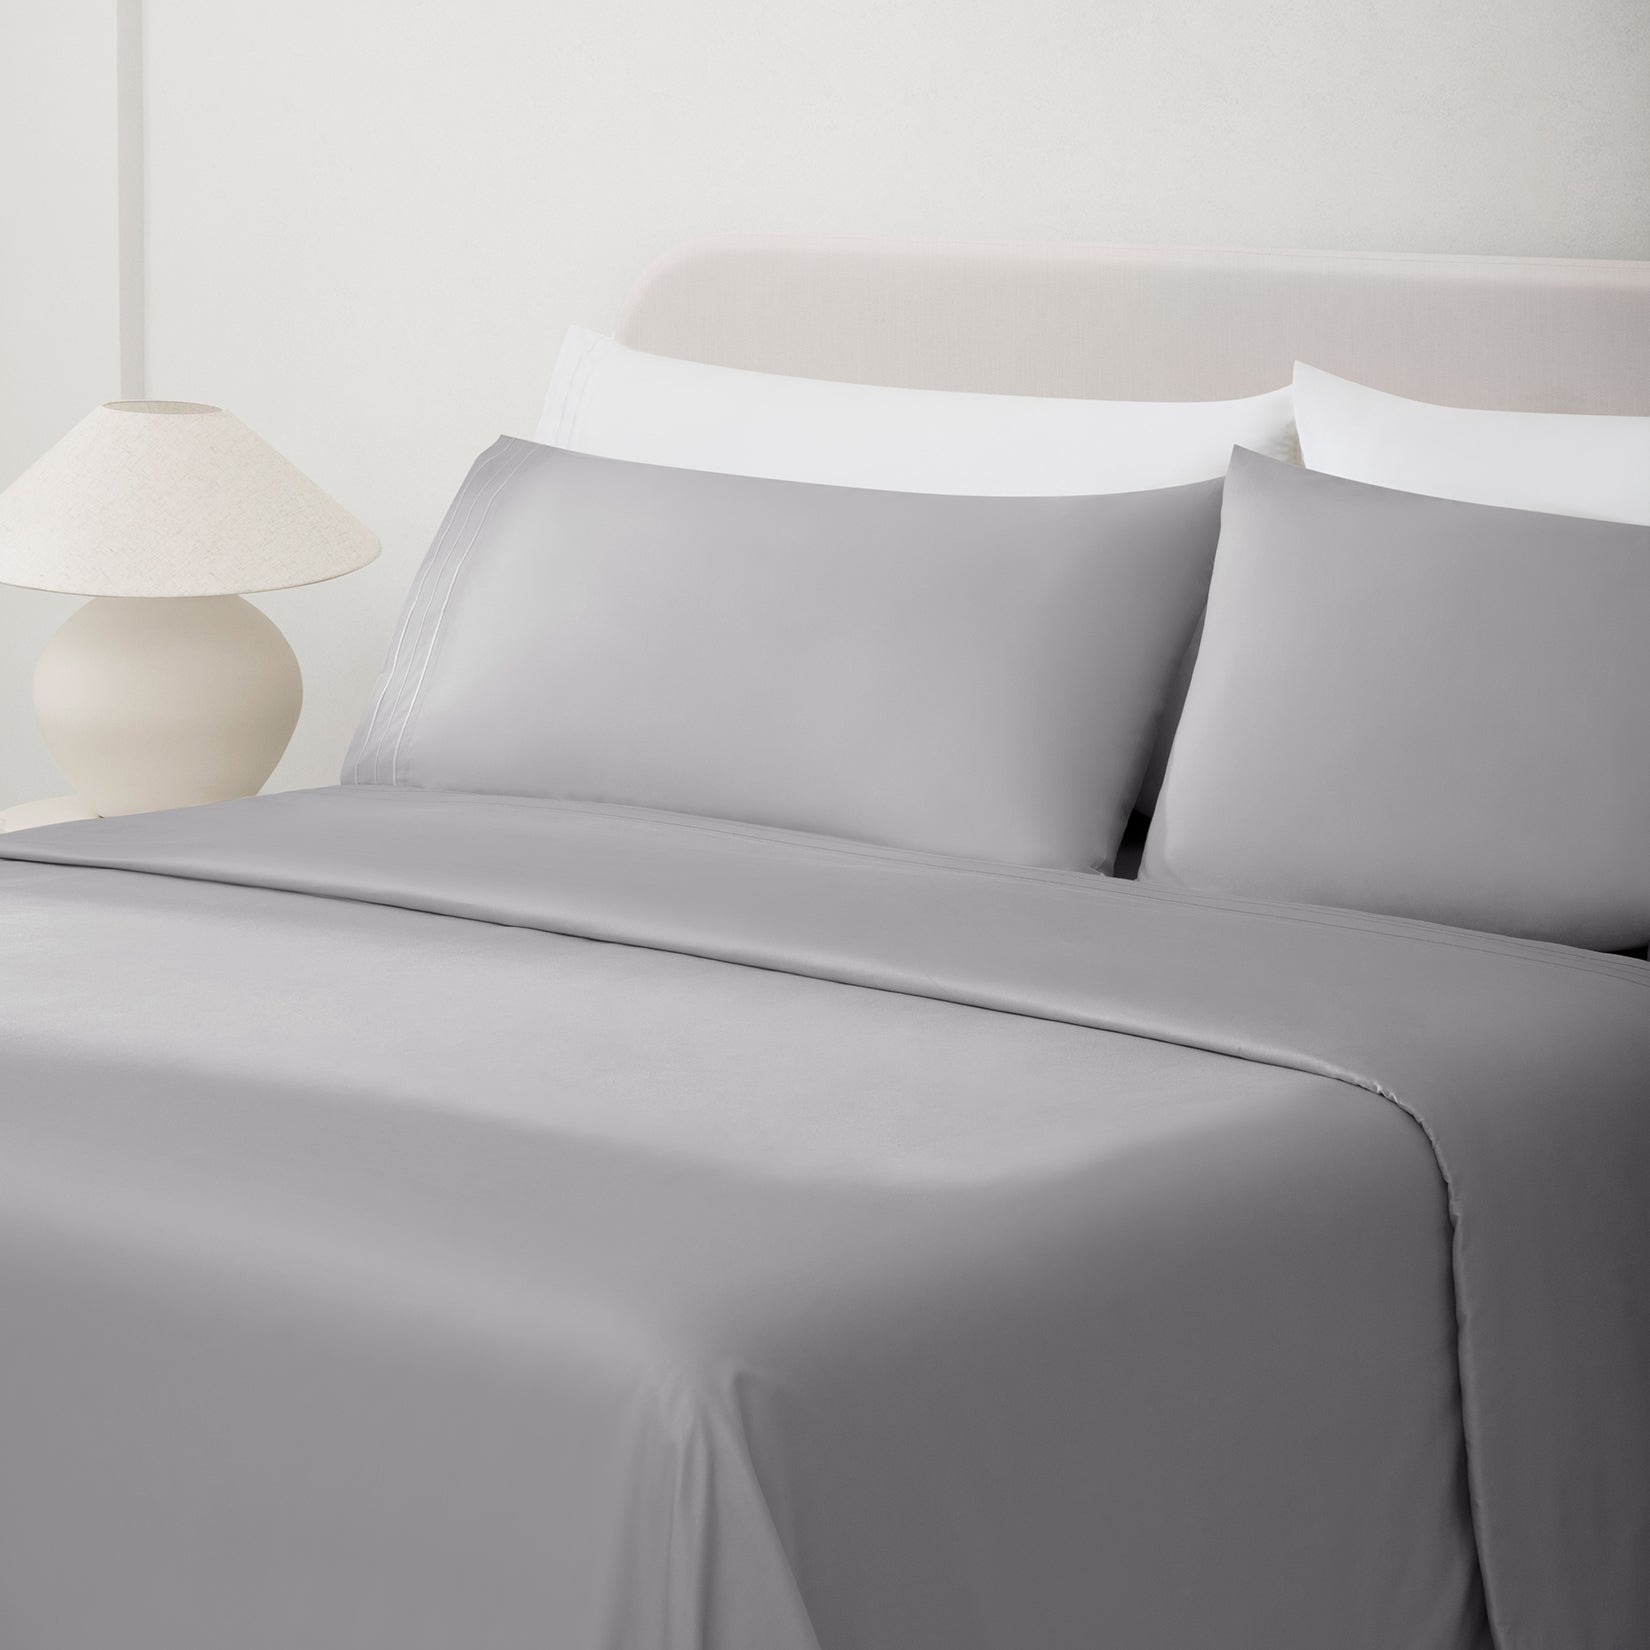 Paulina Foggy Triple Satin Stitched Cuff 200 thread count cotton bed sheet set. Gray pillows and gray cotton sheets on bed next to side table and lamp.